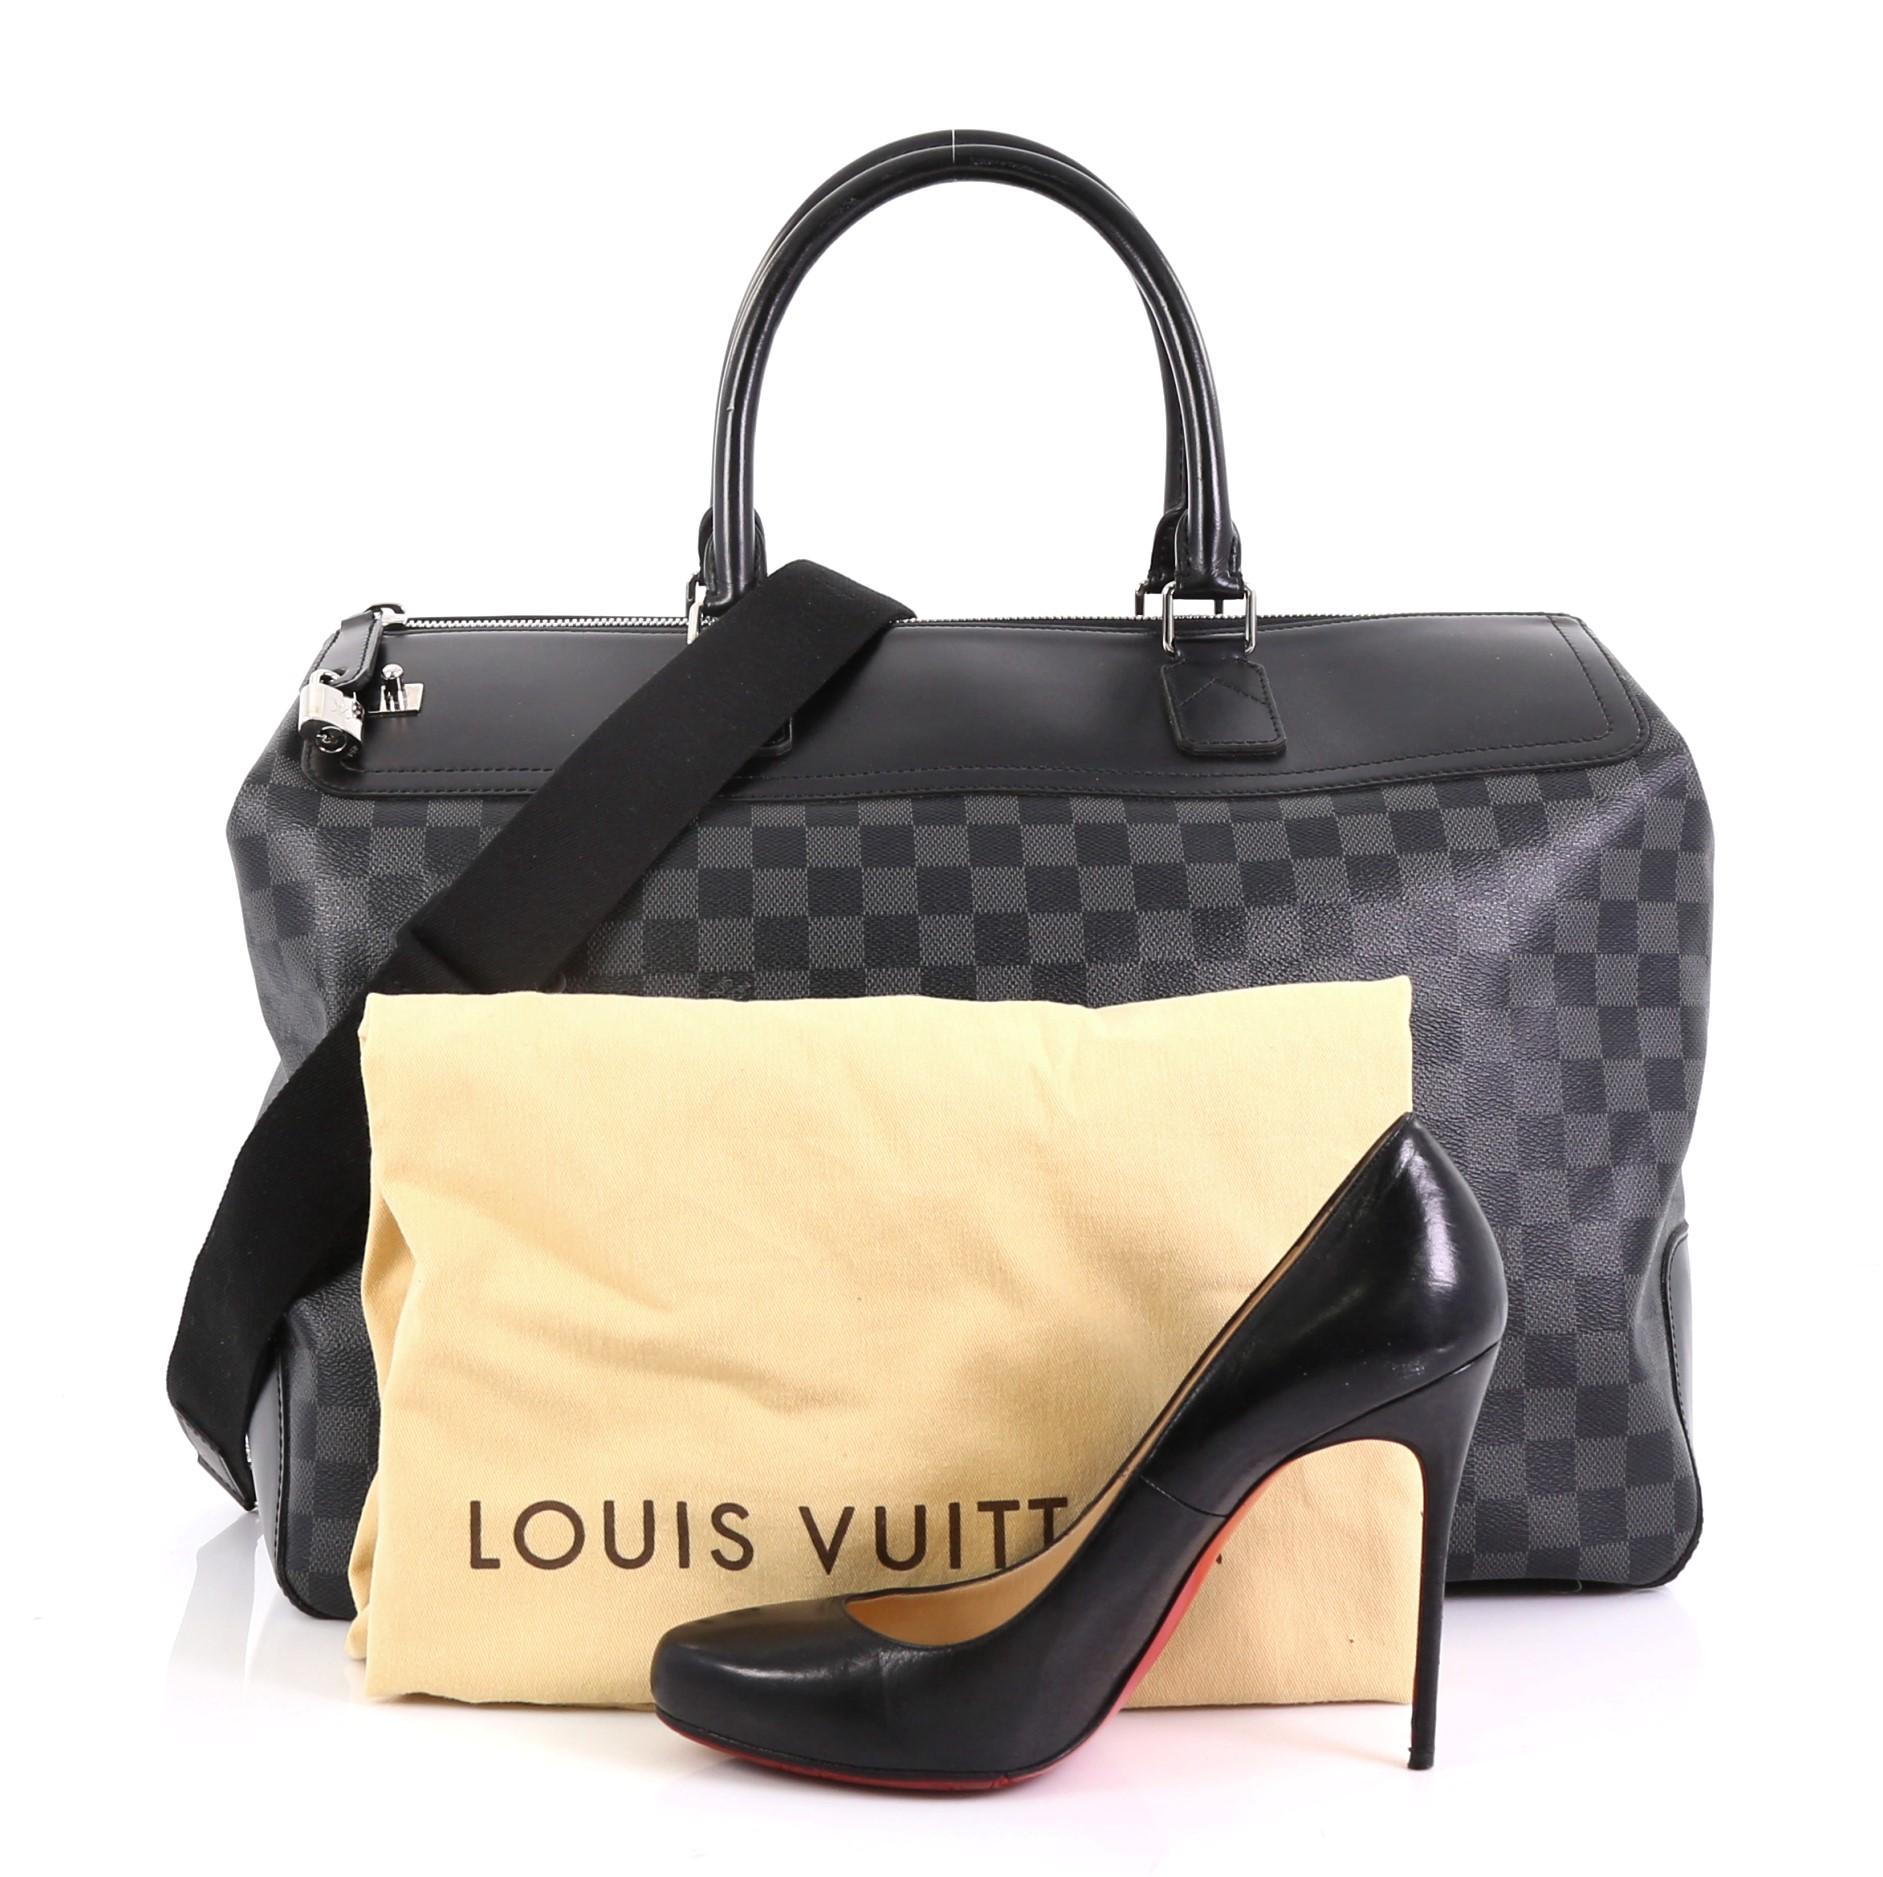 This Louis Vuitton Neo Greenwich Handbag Damier Graphite, crafted in damier graphite coated canvas, features dual rolled handles, leather trim, protective base studs and silver-tone hardware. Its zip closure opens to a black fabric interior with